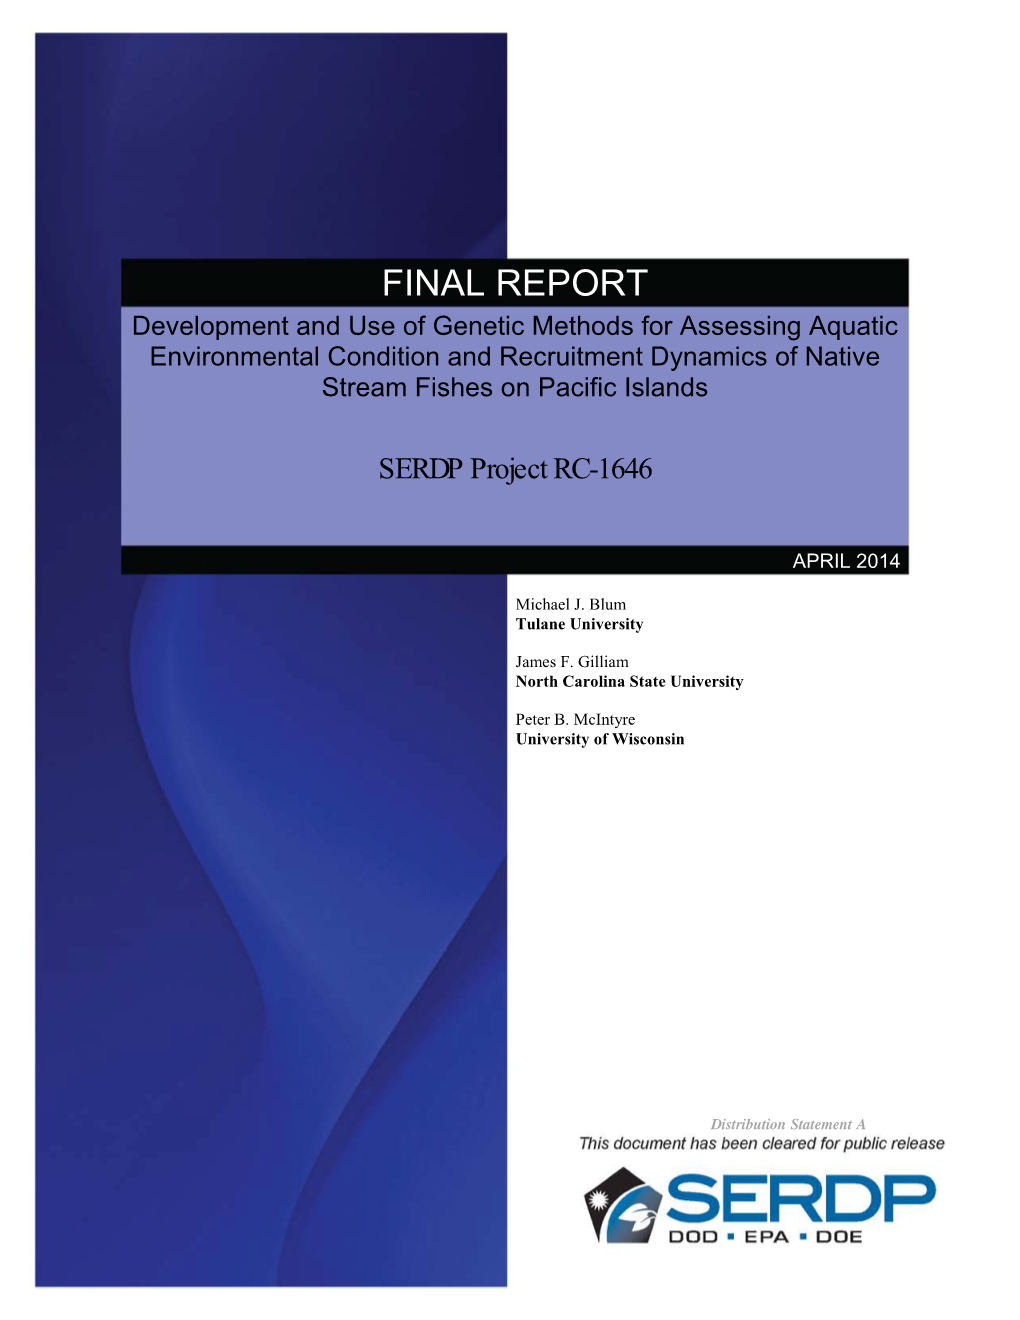 FINAL REPORT Development and Use of Genetic Methods for Assessing Aquatic Environmental Condition and Recruitment Dynamics of Native Stream Fishes on Pacific Islands